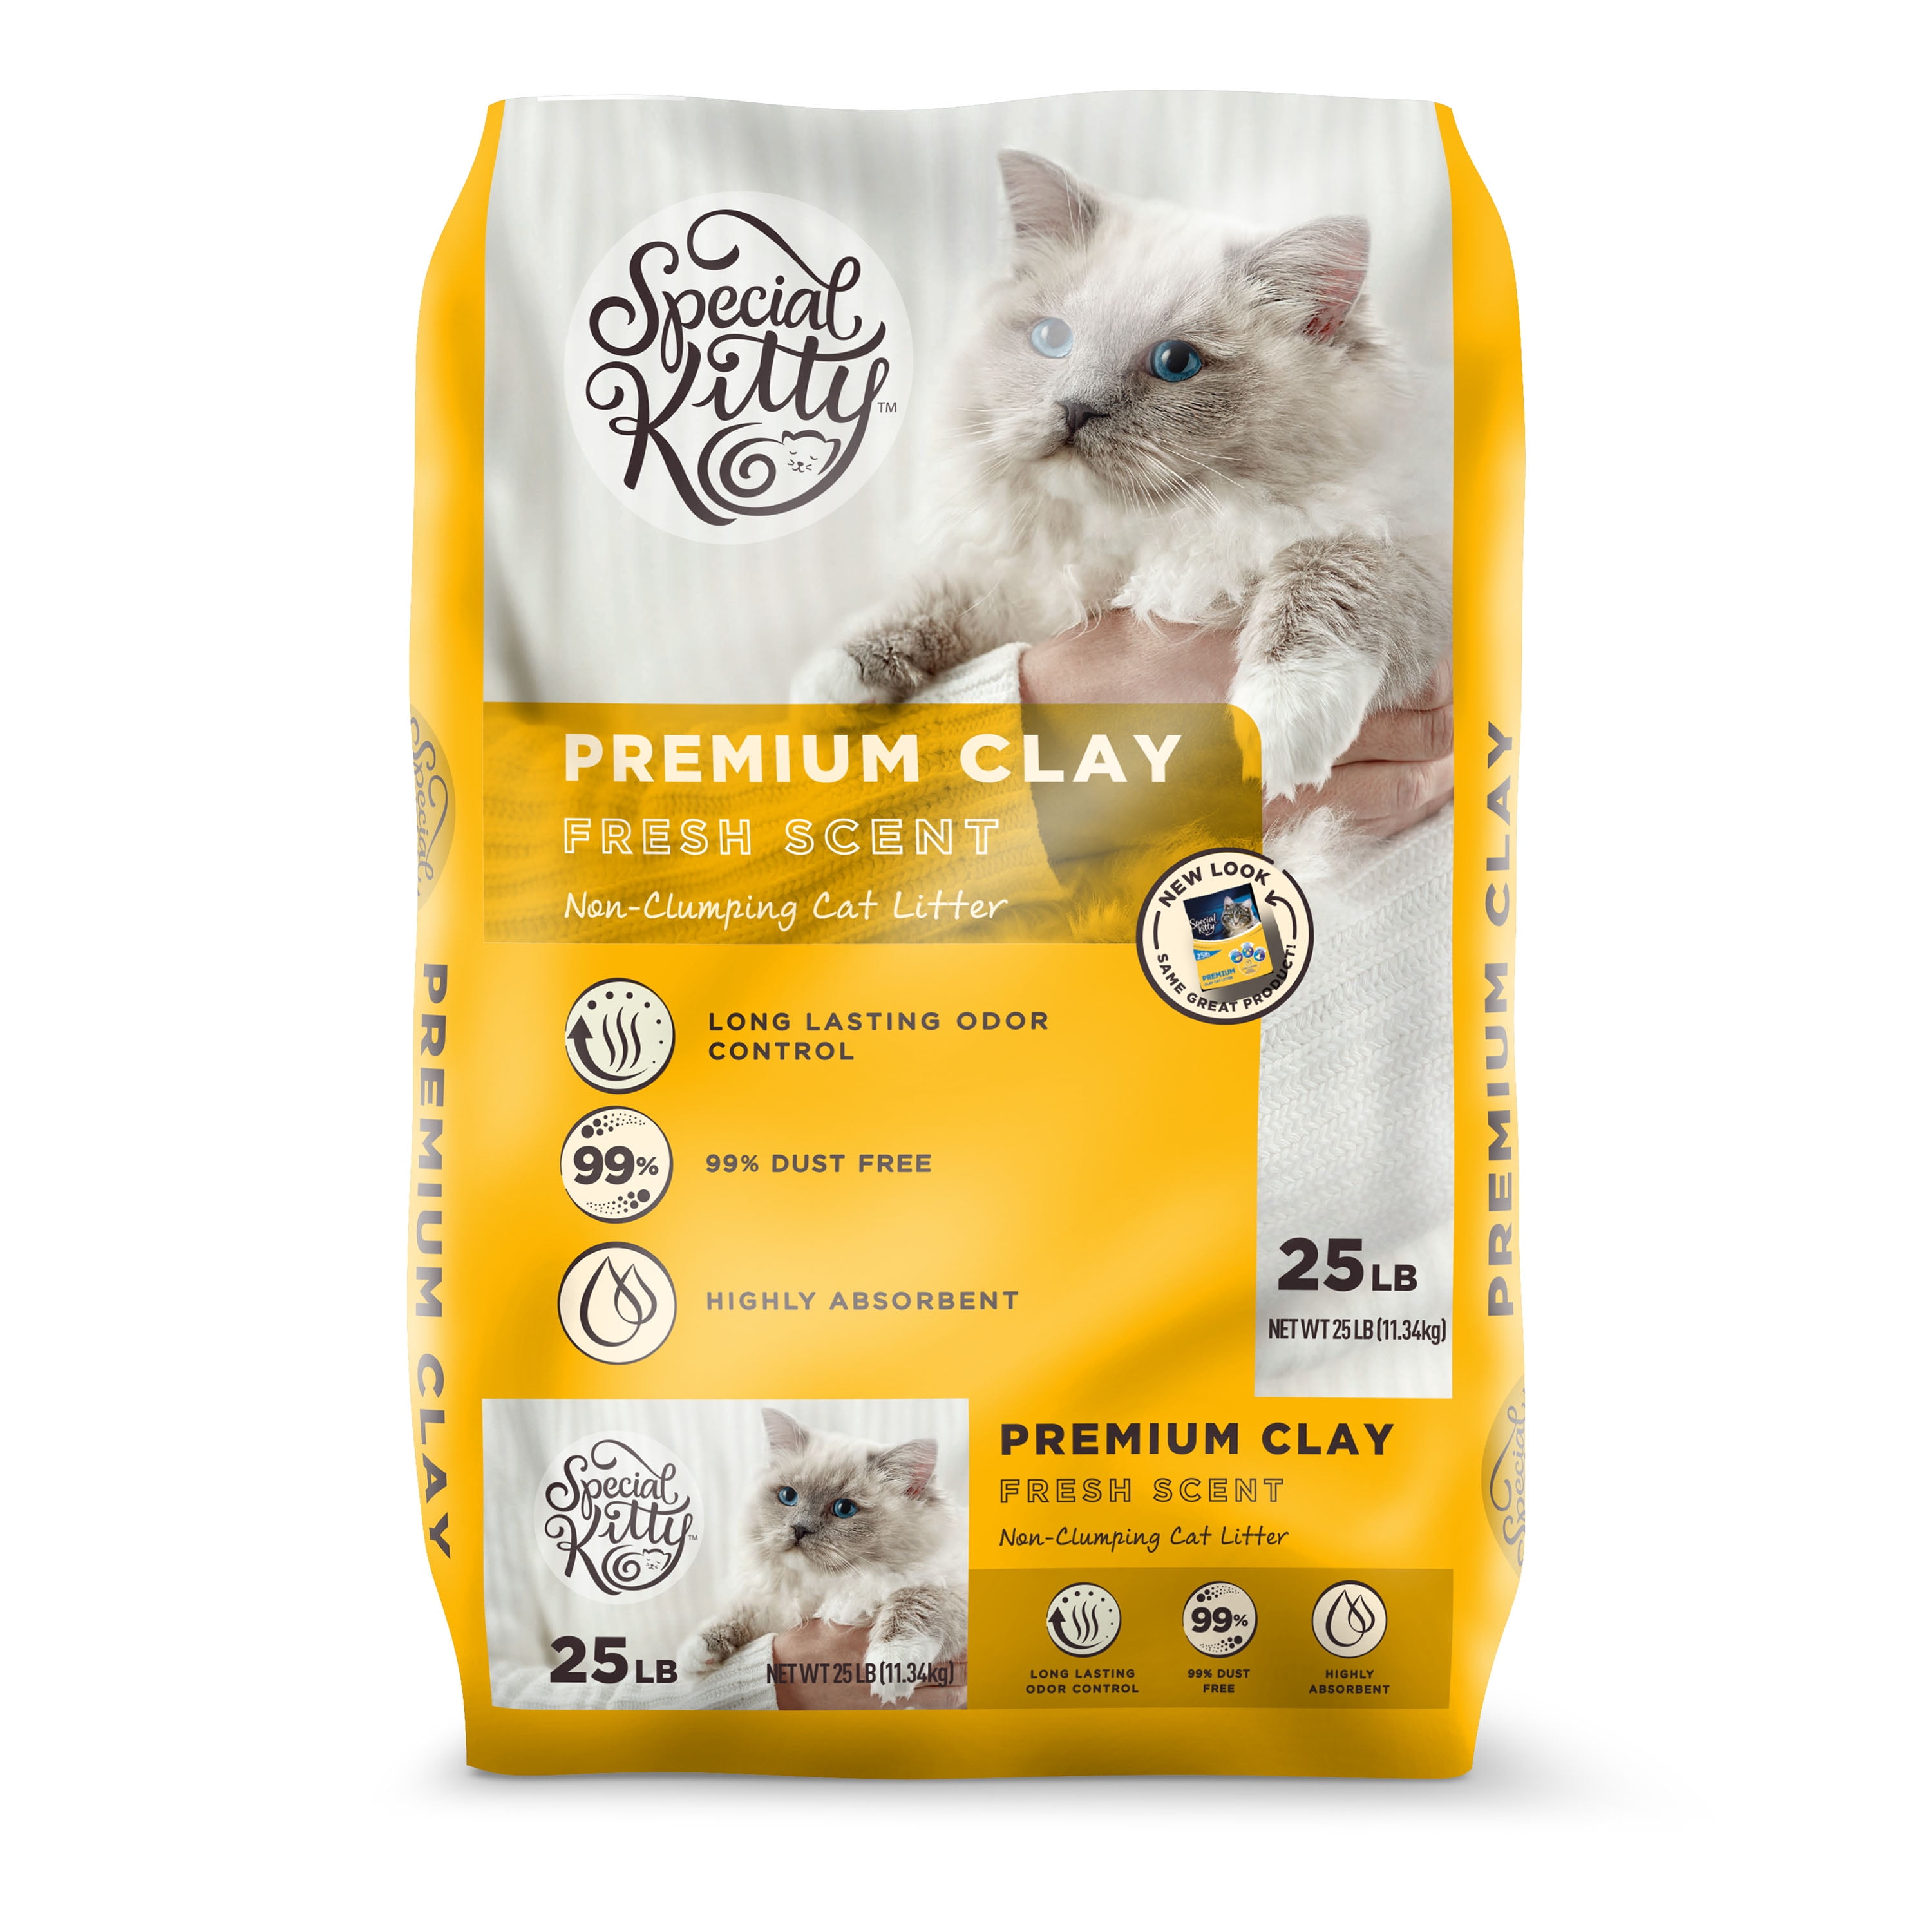 Special Kitty Premium Clay Cat Litter, Fresh Scent, 25 lb